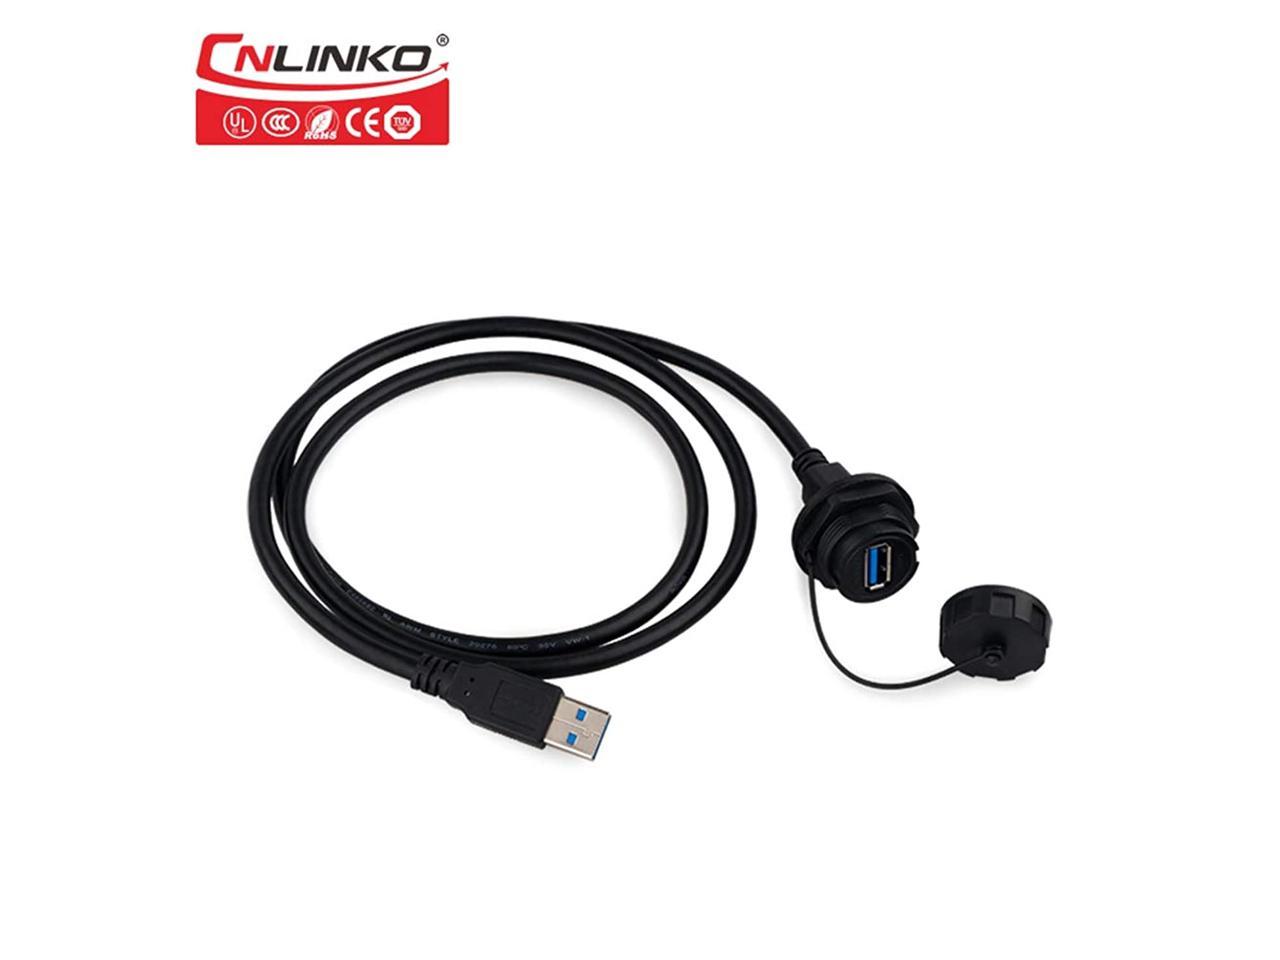 CNLINKO USB 3.0 Connector, Type A Female, Panel Mount Receptacles 